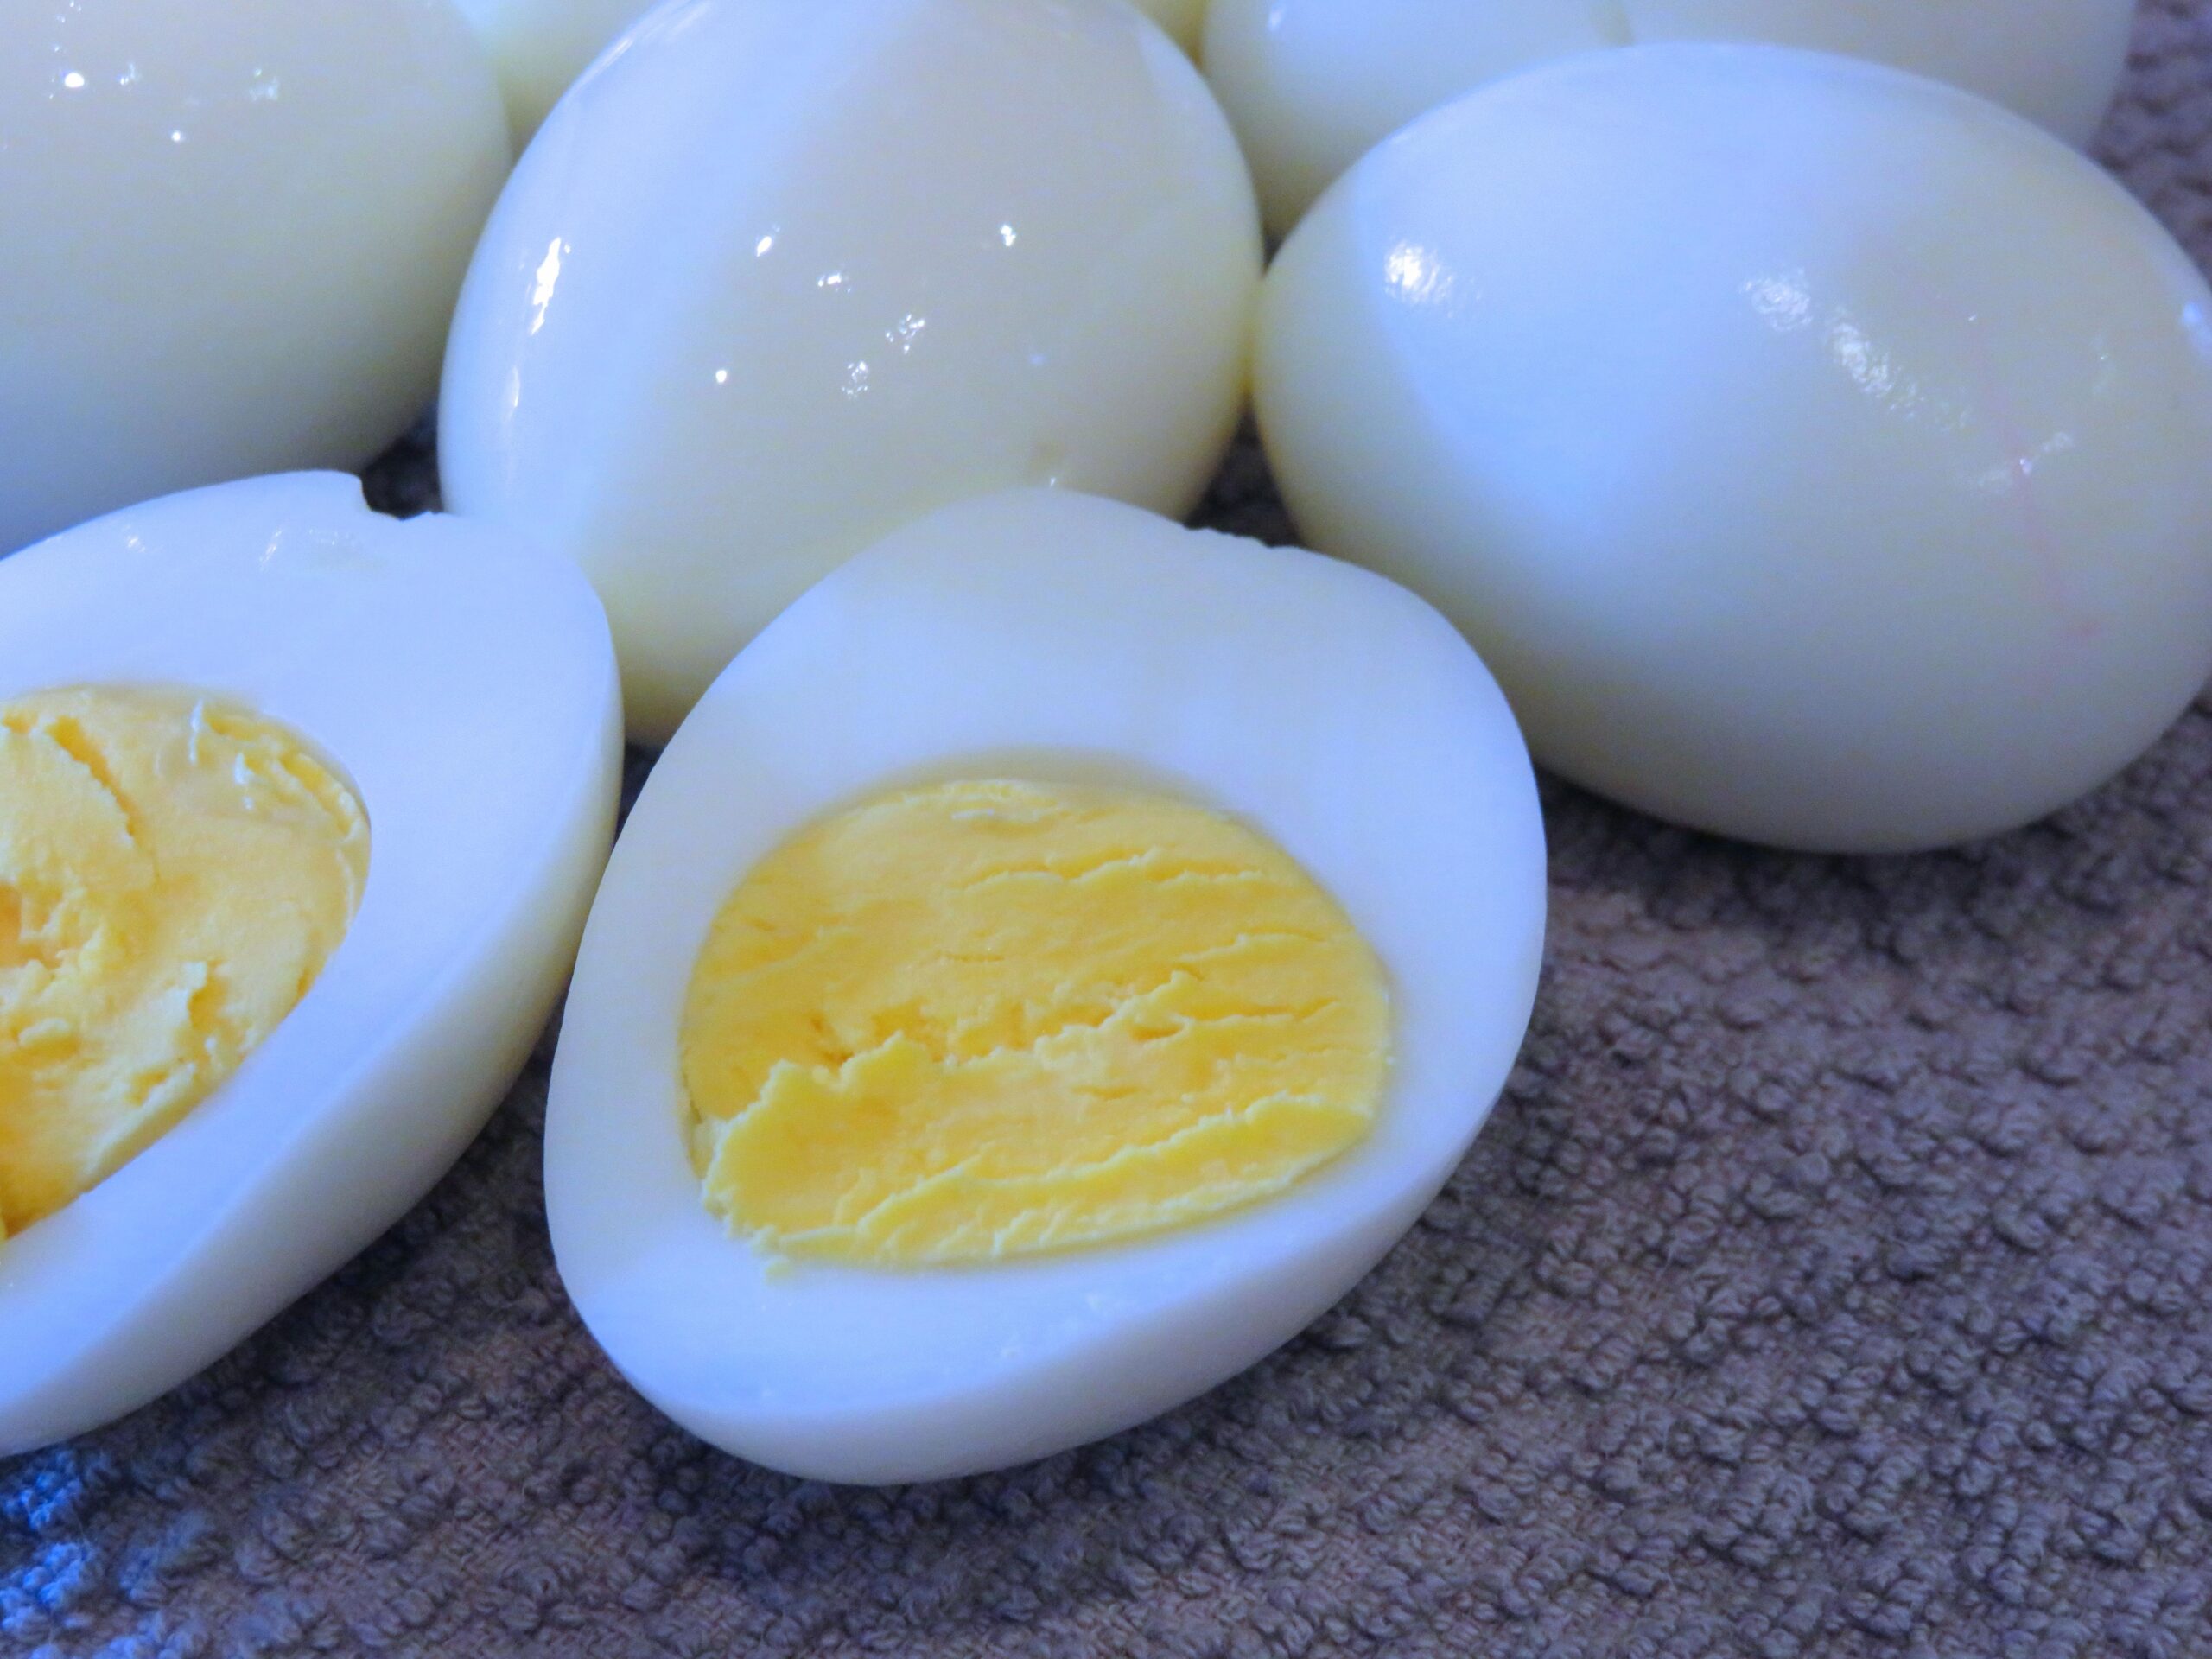  Get your Instant Pot ready to make the perfect hard-boiled eggs!